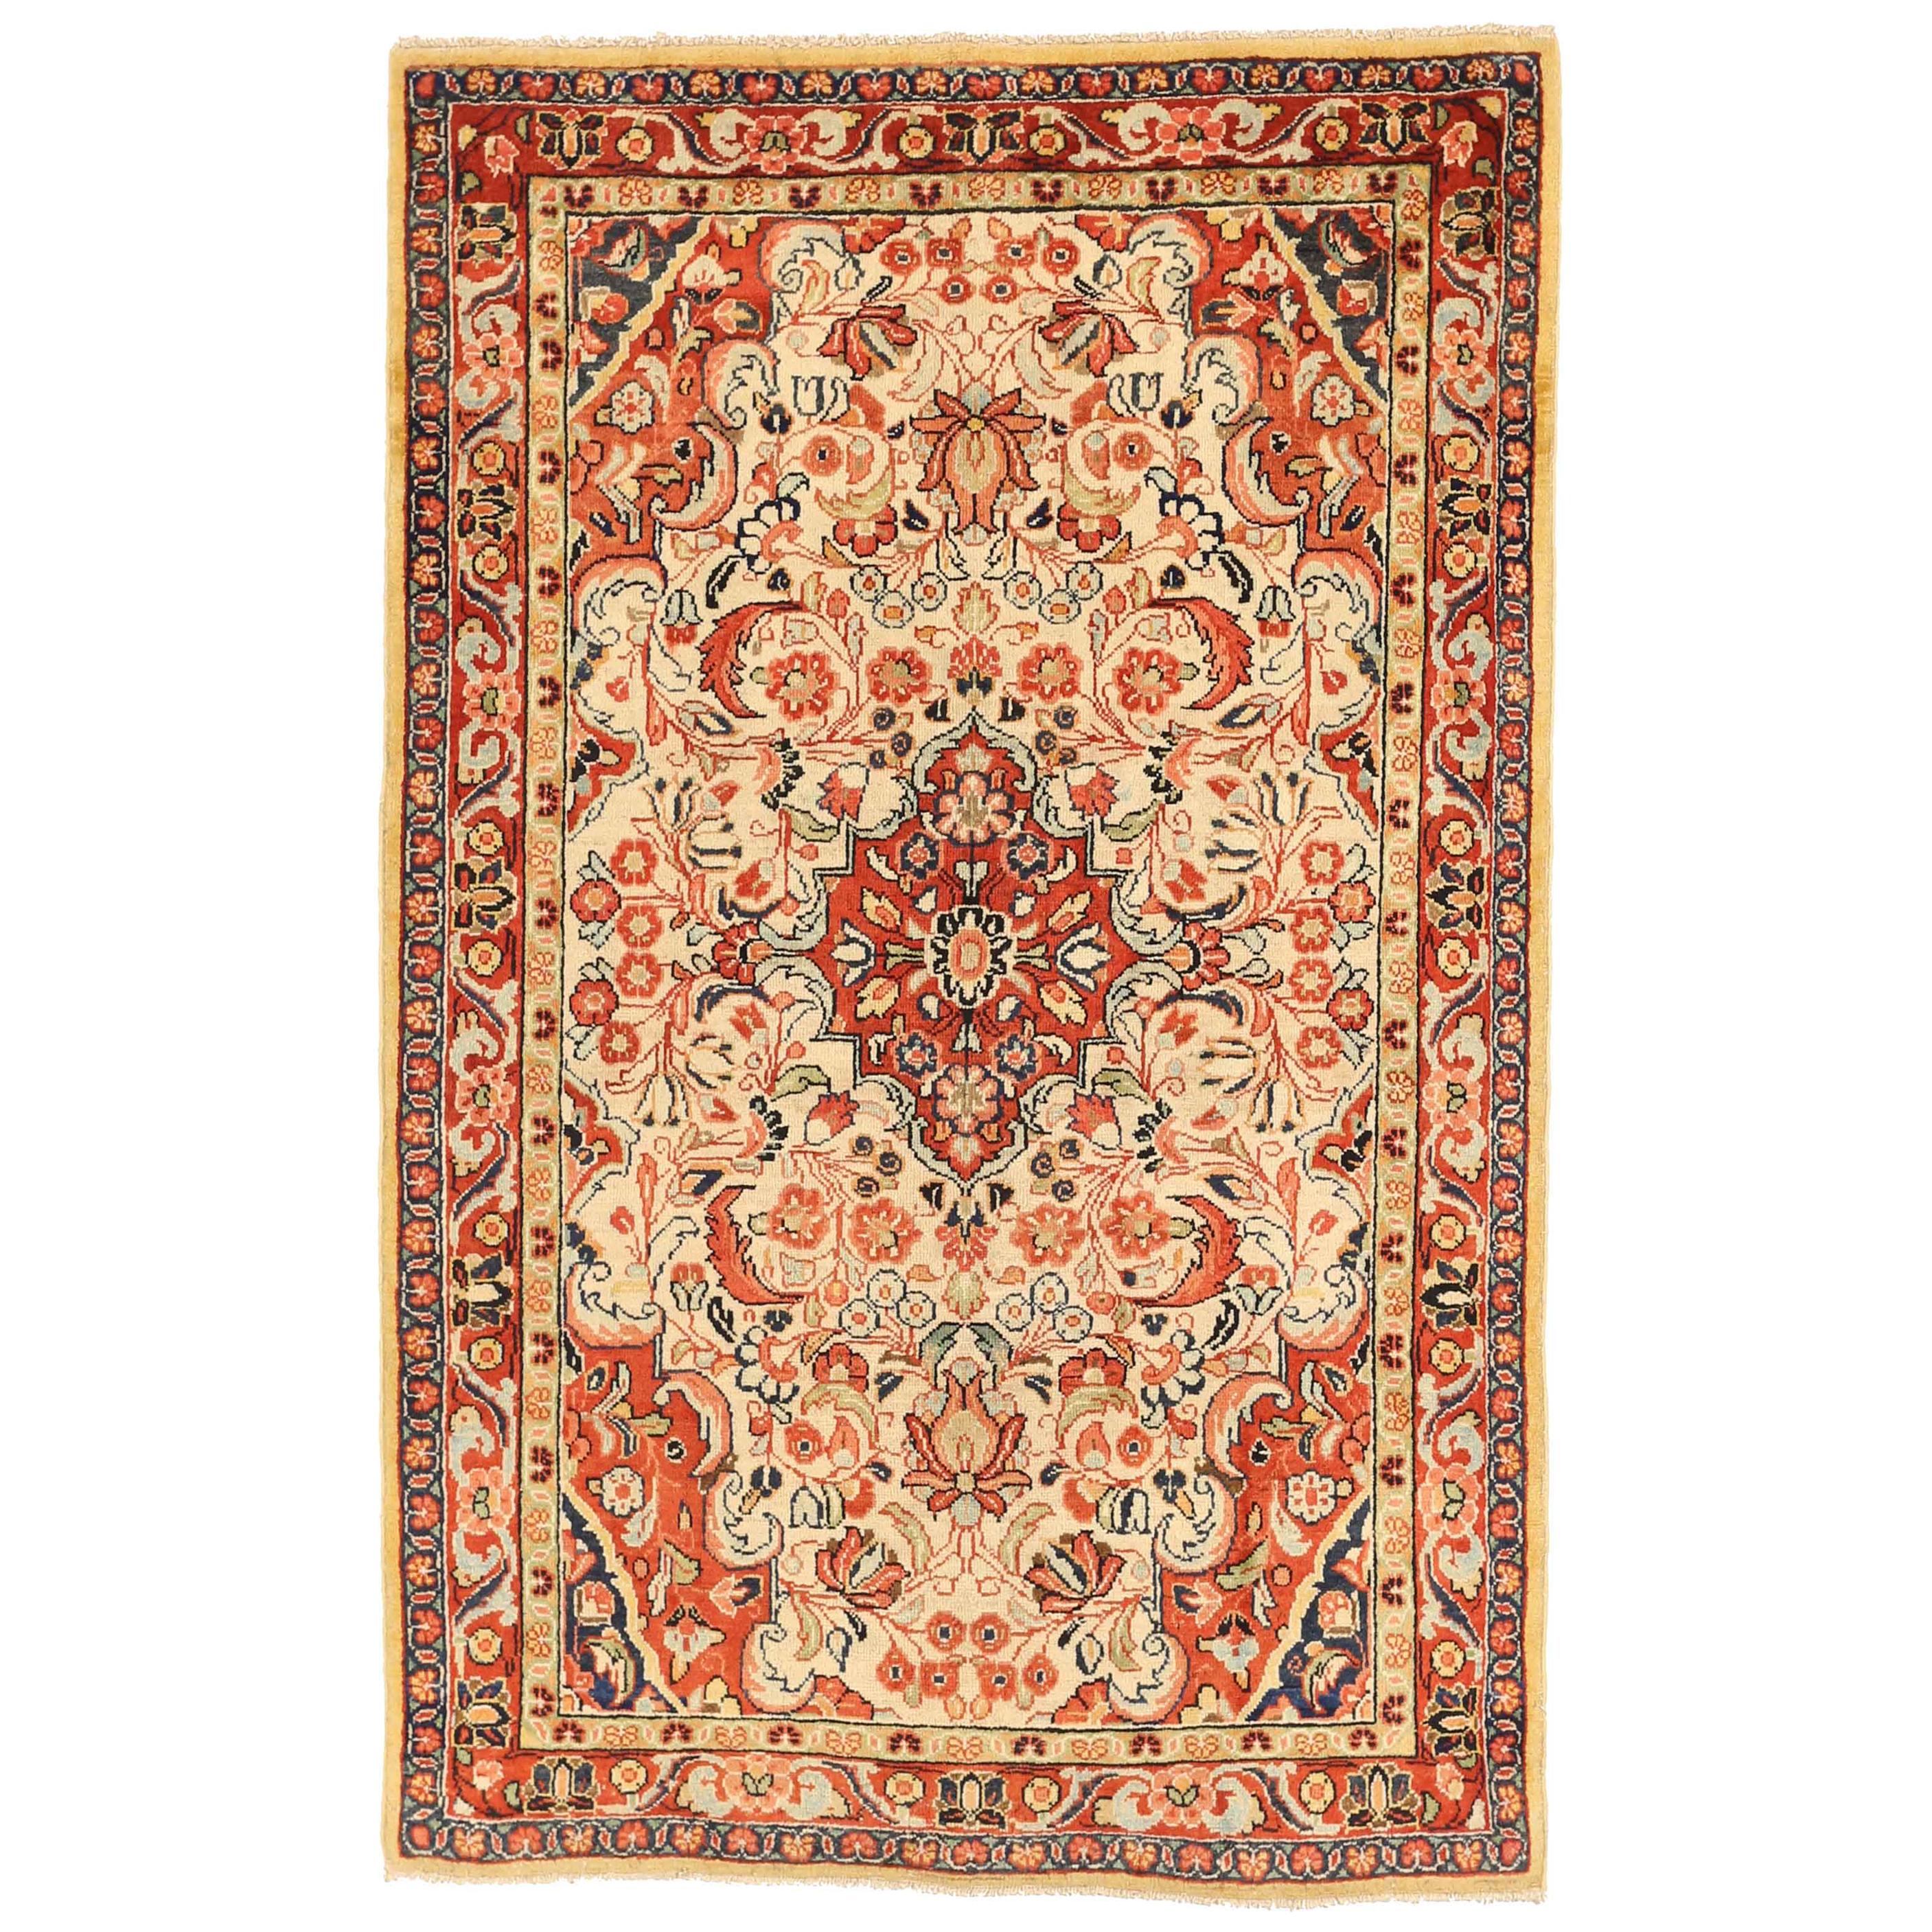 Antique Persian Mahal Rug with Red & Ivory Floral Details on Red Field